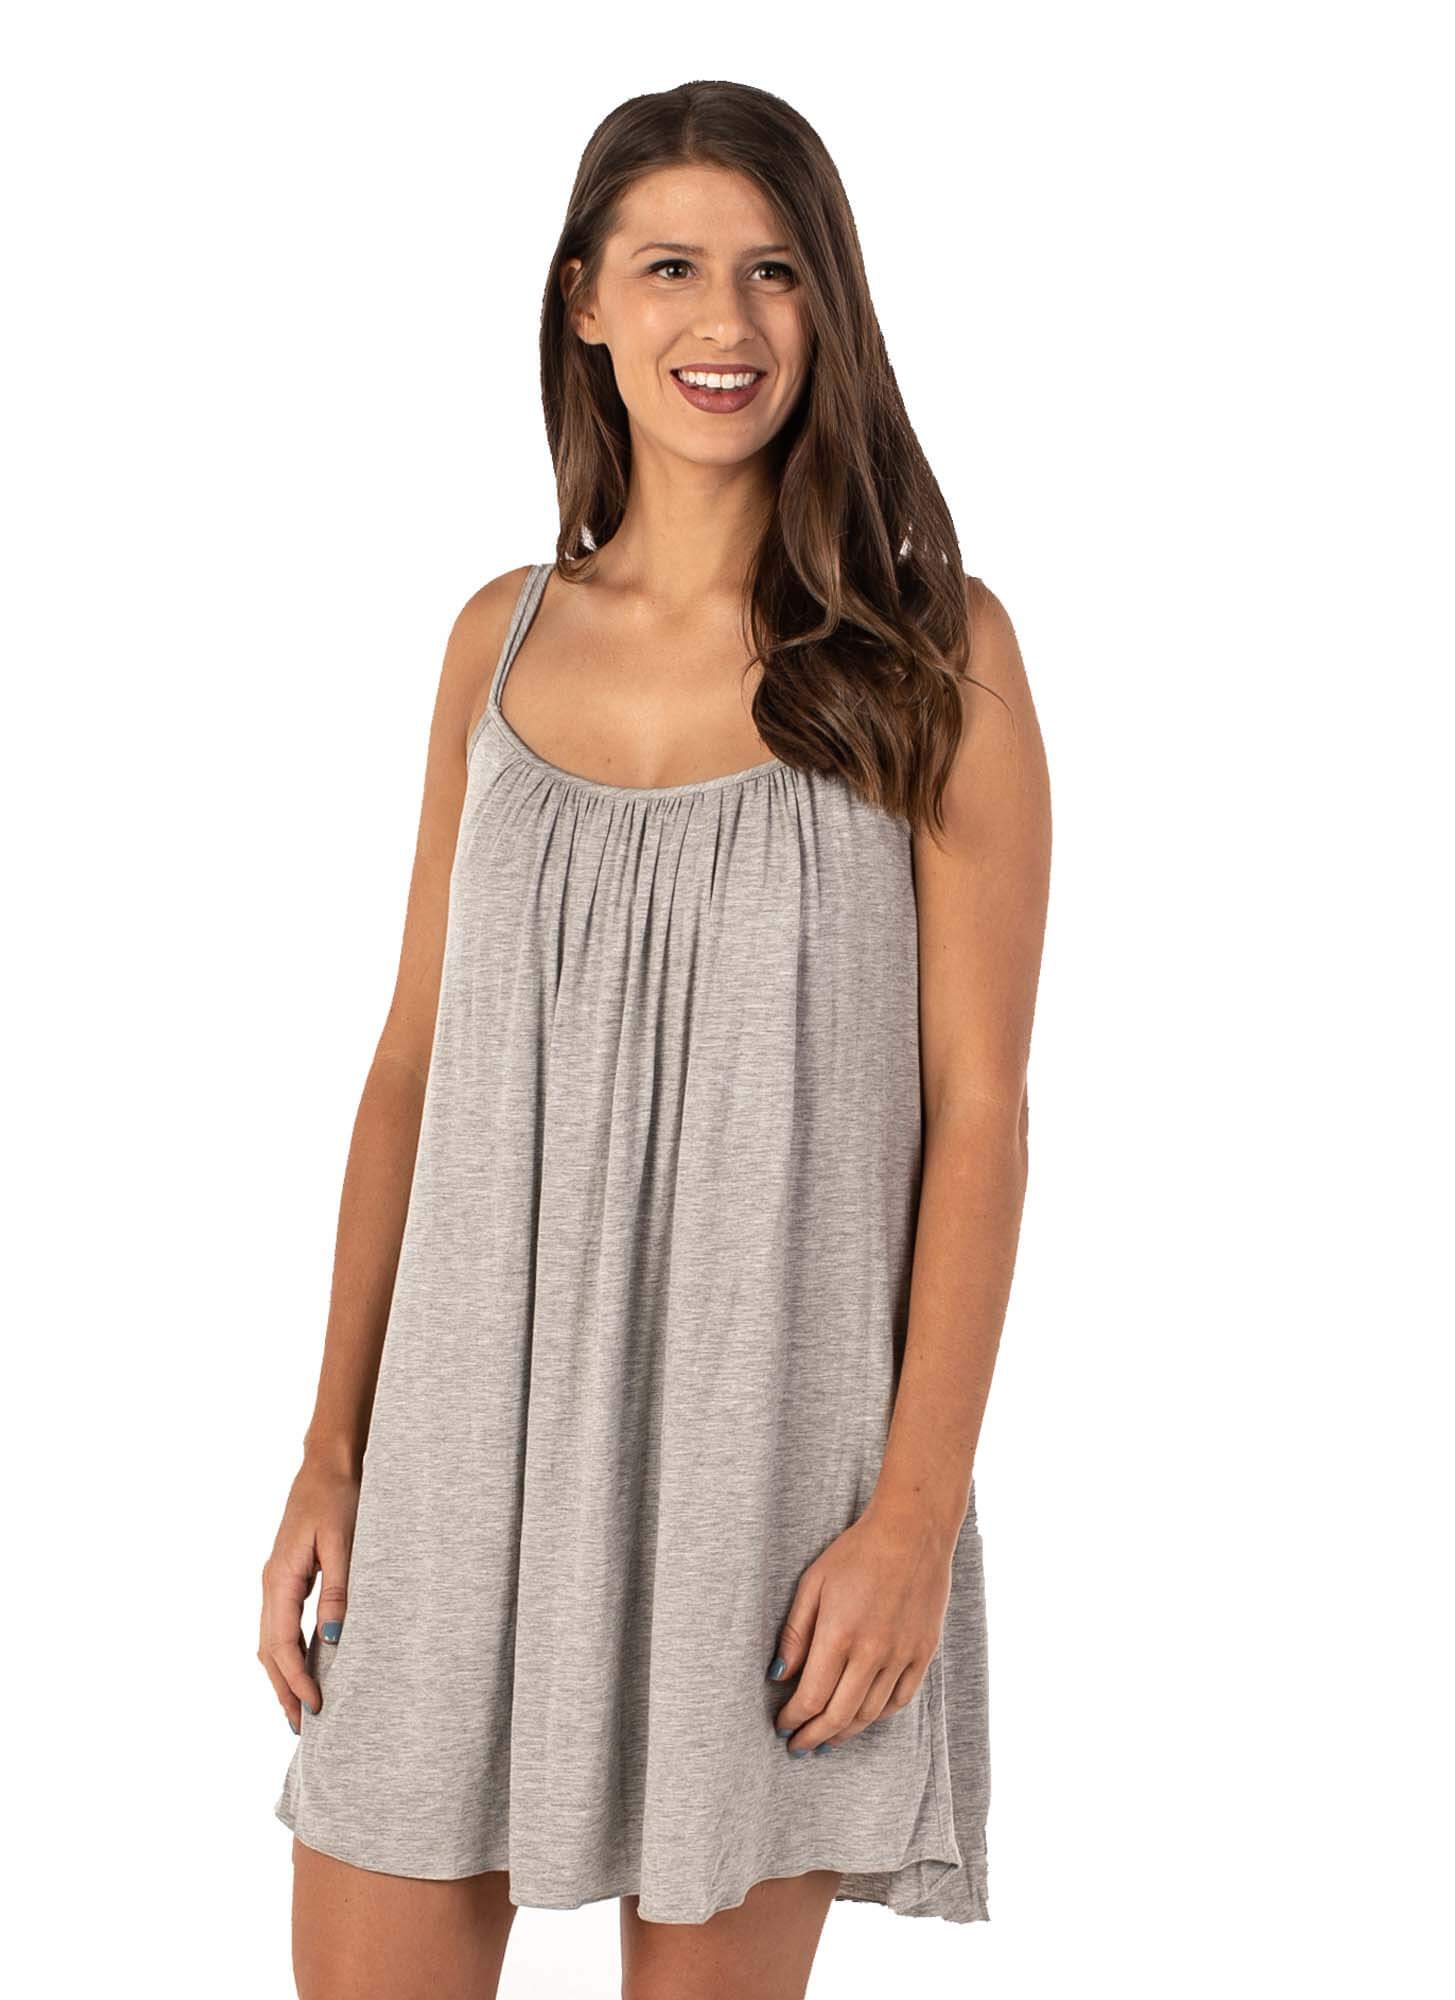 Nightgown with built in bra in heather